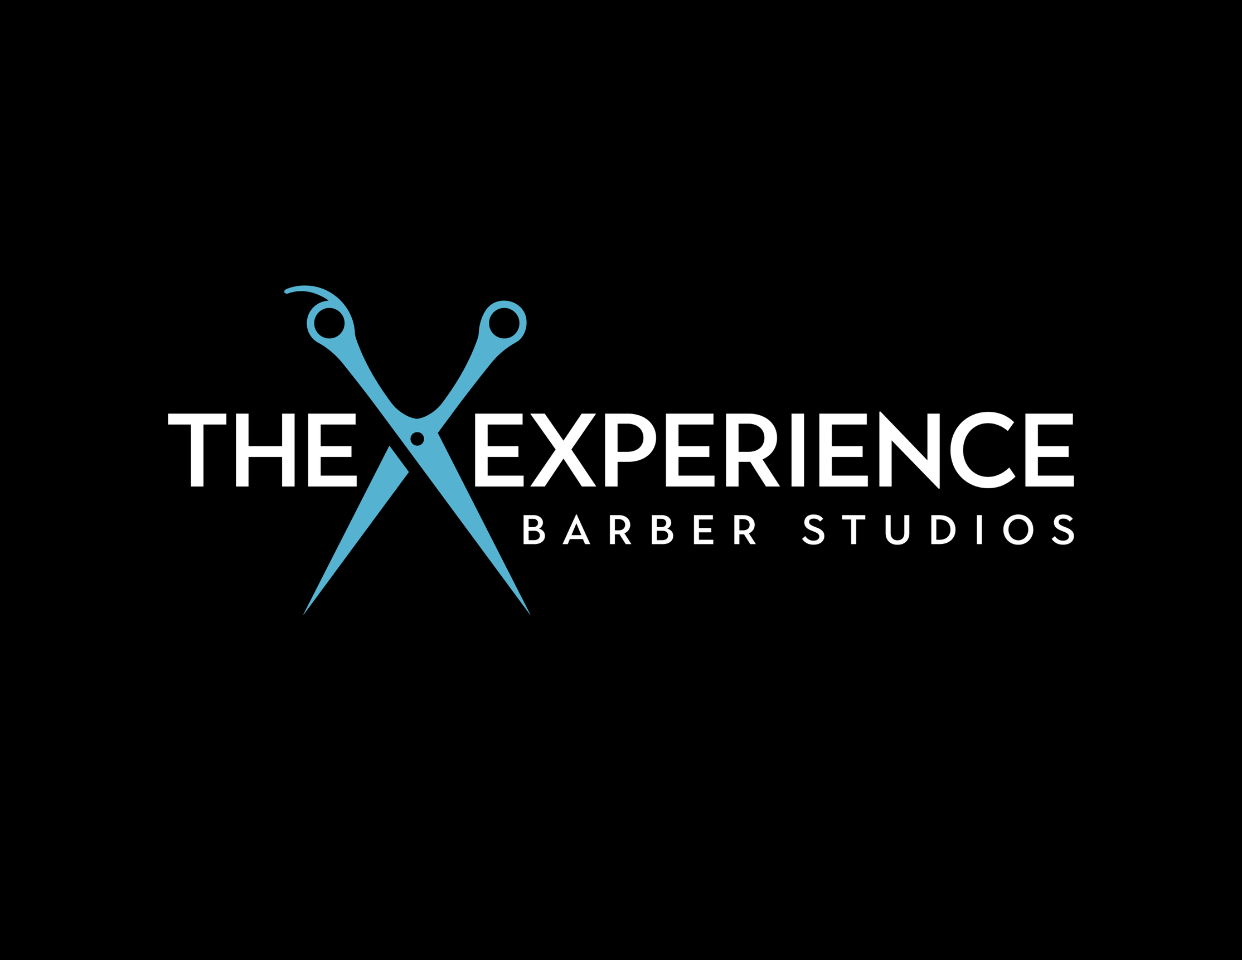 The Need and Importance of a Barbershop Near me For A Super Experience! by  mug_shoppe - Issuu